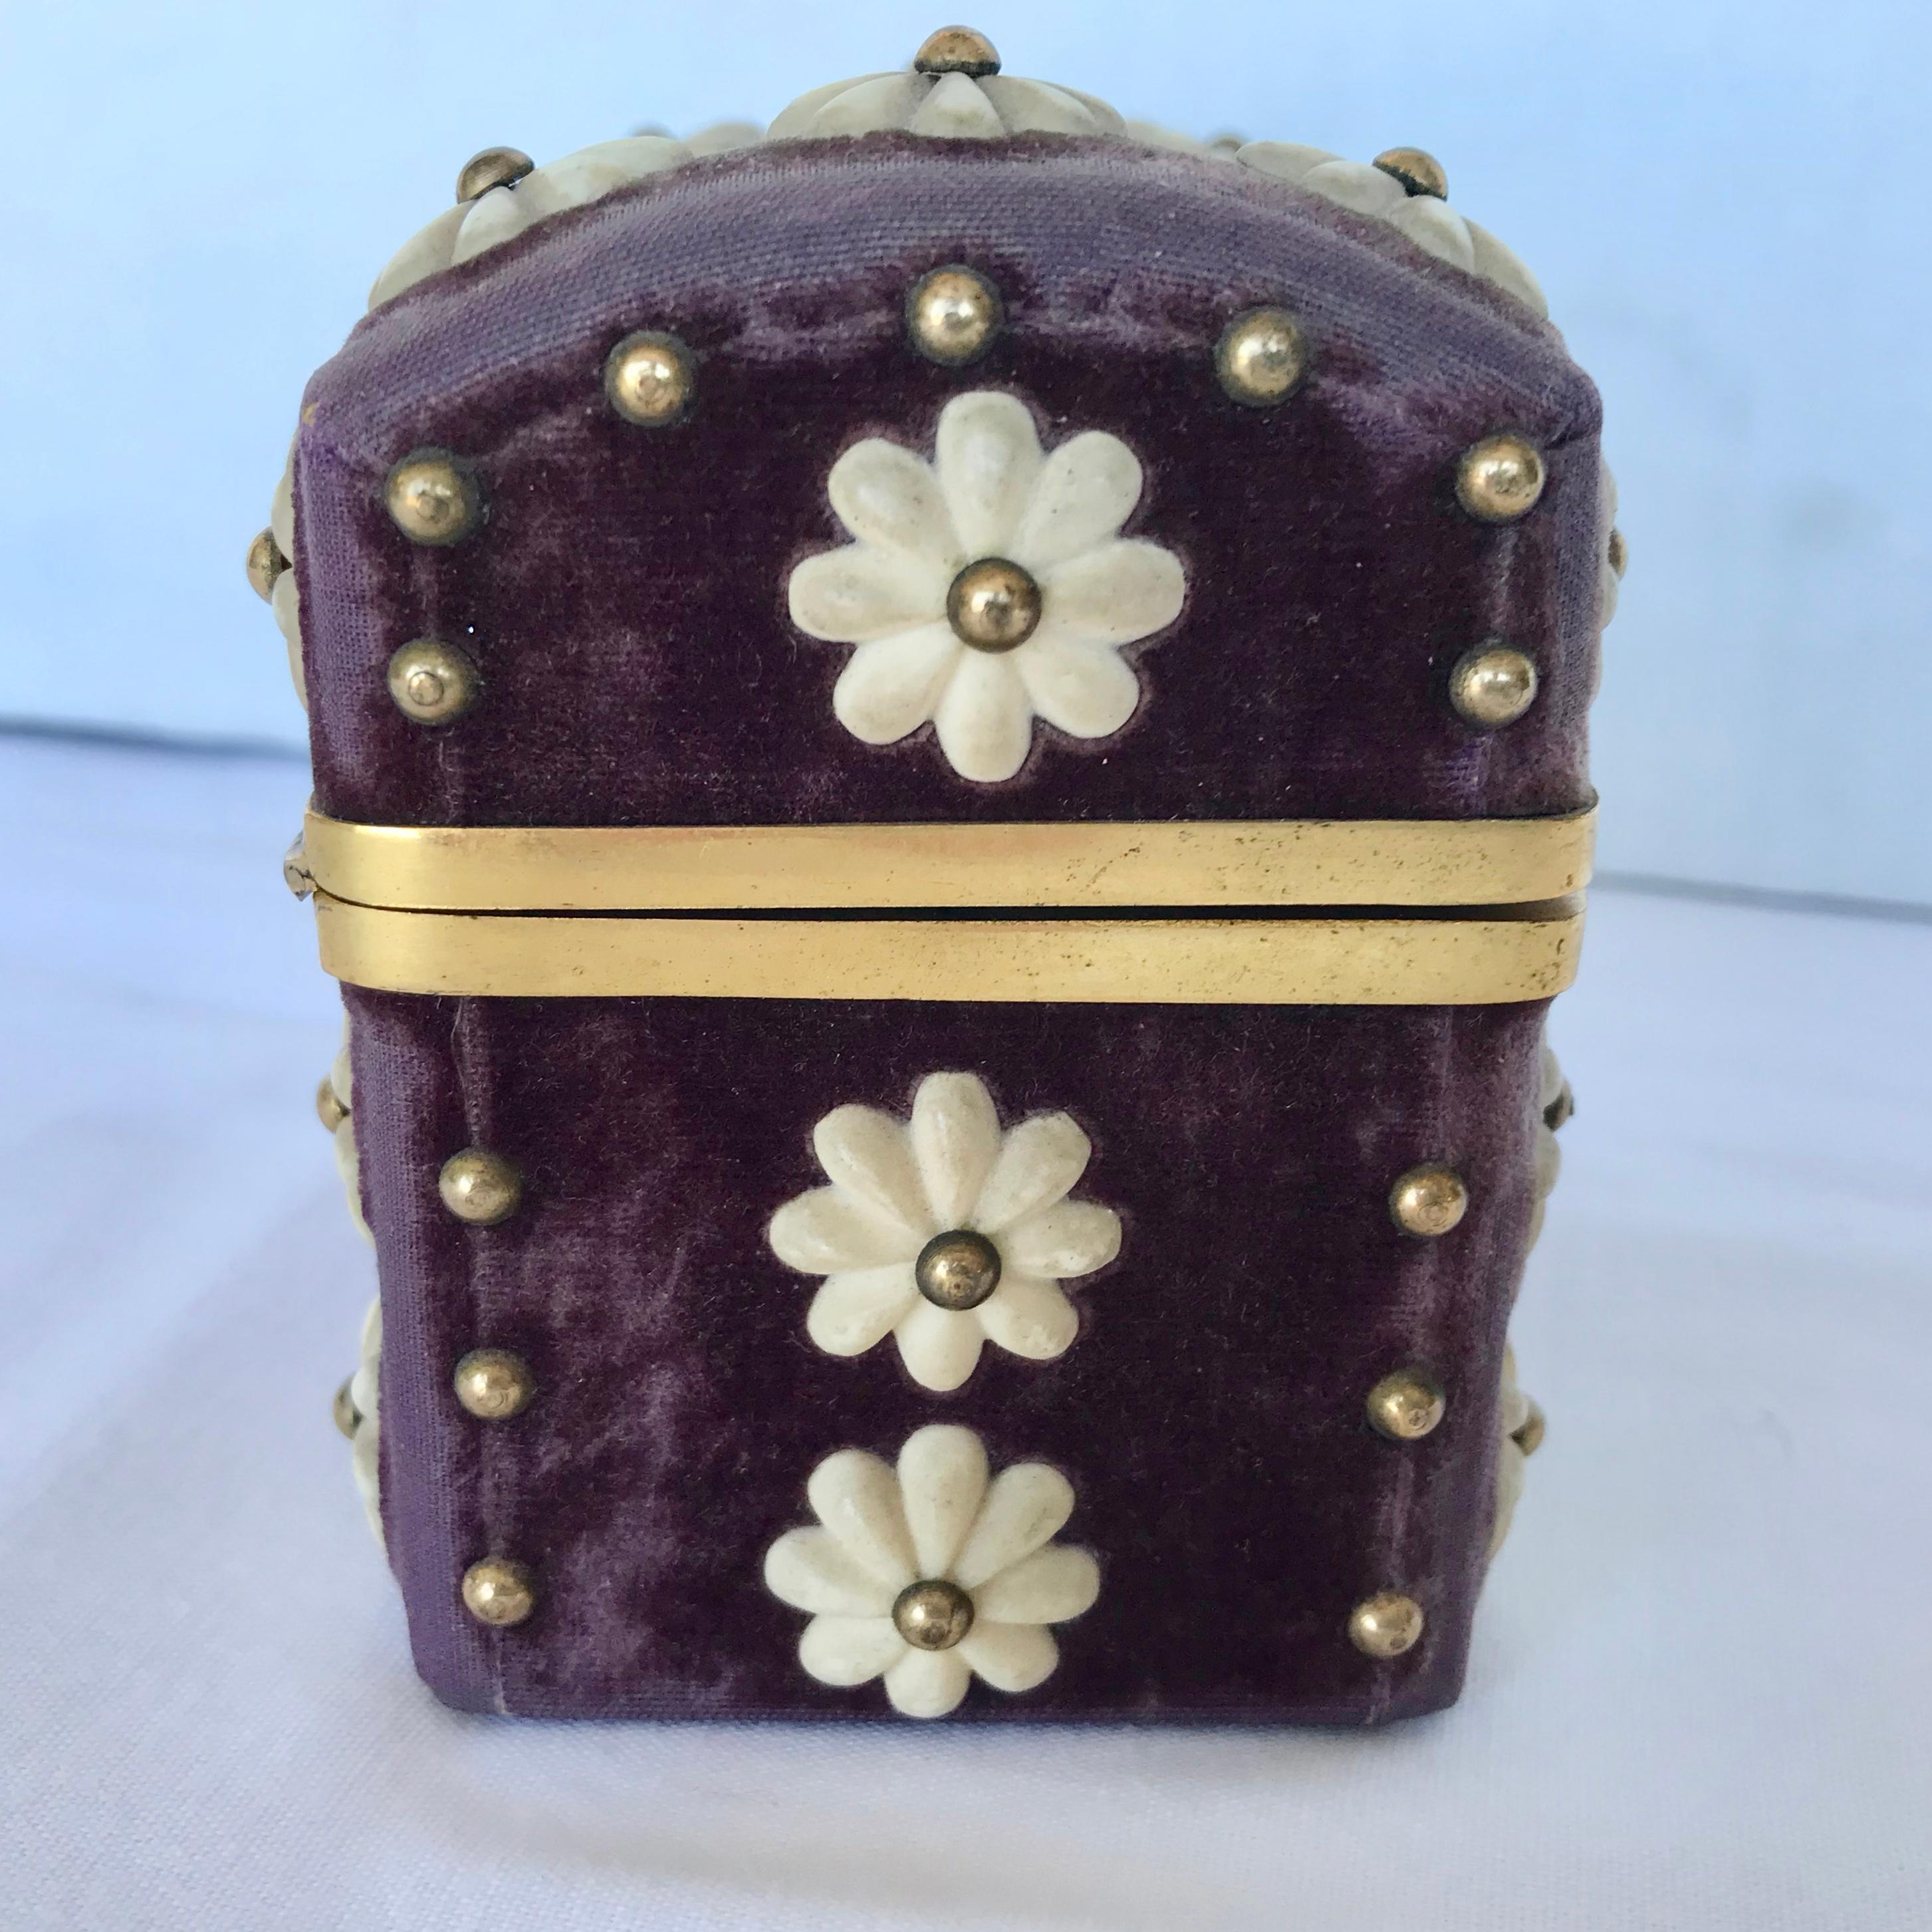 19th Century English Dore' Mounted Travel Casket with 2 Scent Bottles 1